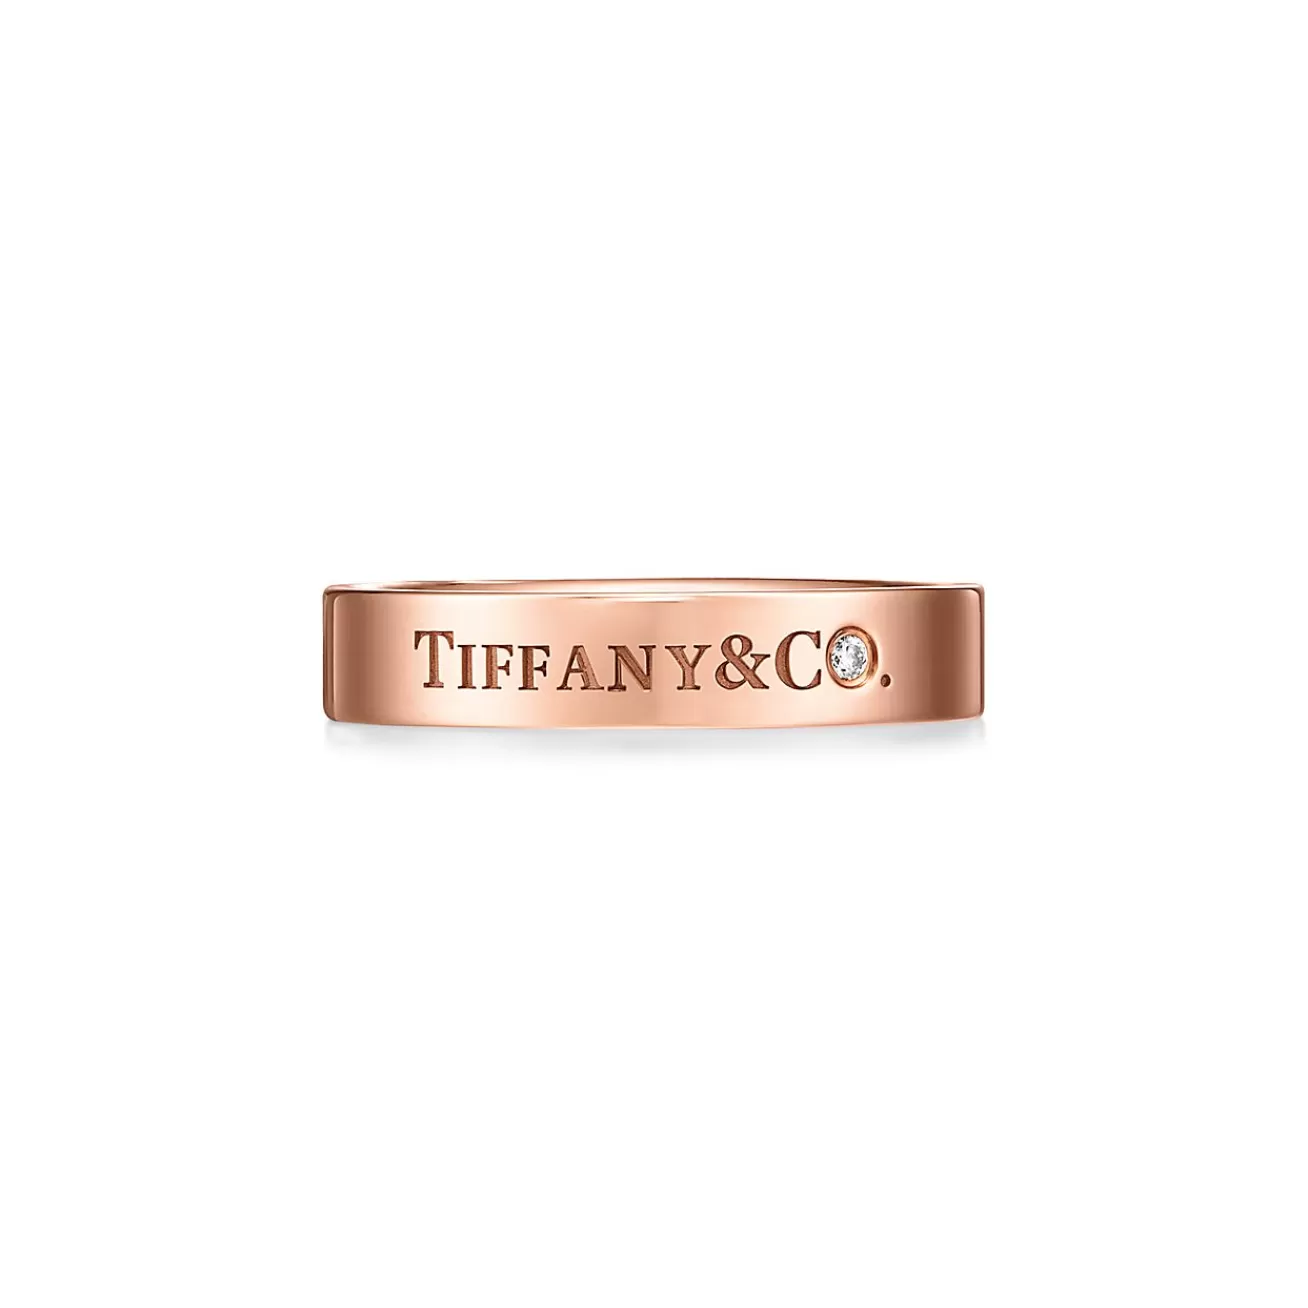 Tiffany & Co. T&CO.® Band Ring in Rose Gold with a Diamond | ^ Rings | Rose Gold Jewelry